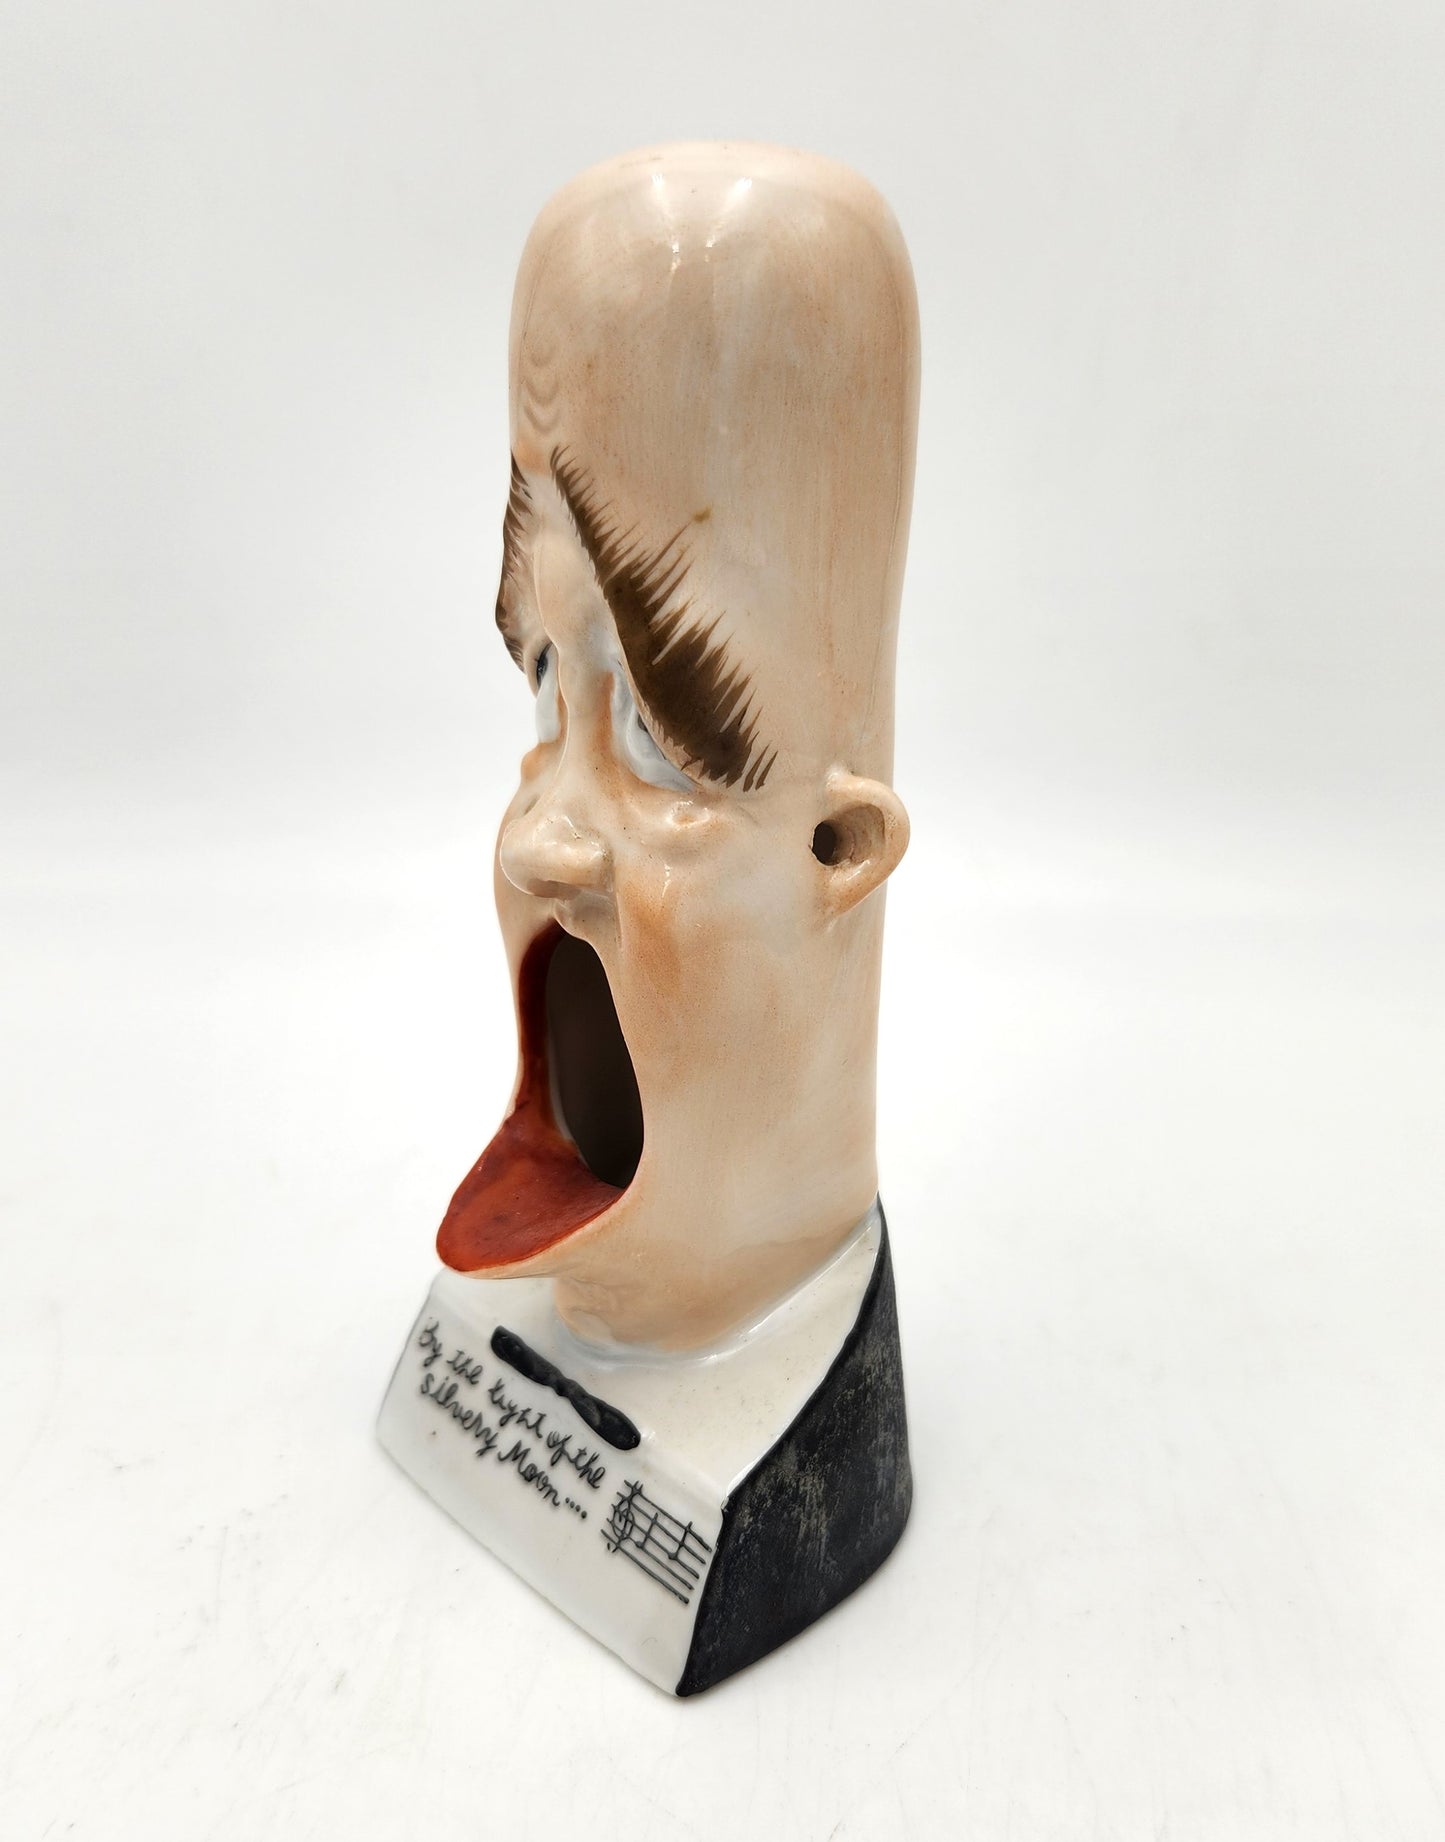 Ceramic Novelty Ugly Face Ashtray 'By The Light of the Silvery Moon' - 14cm